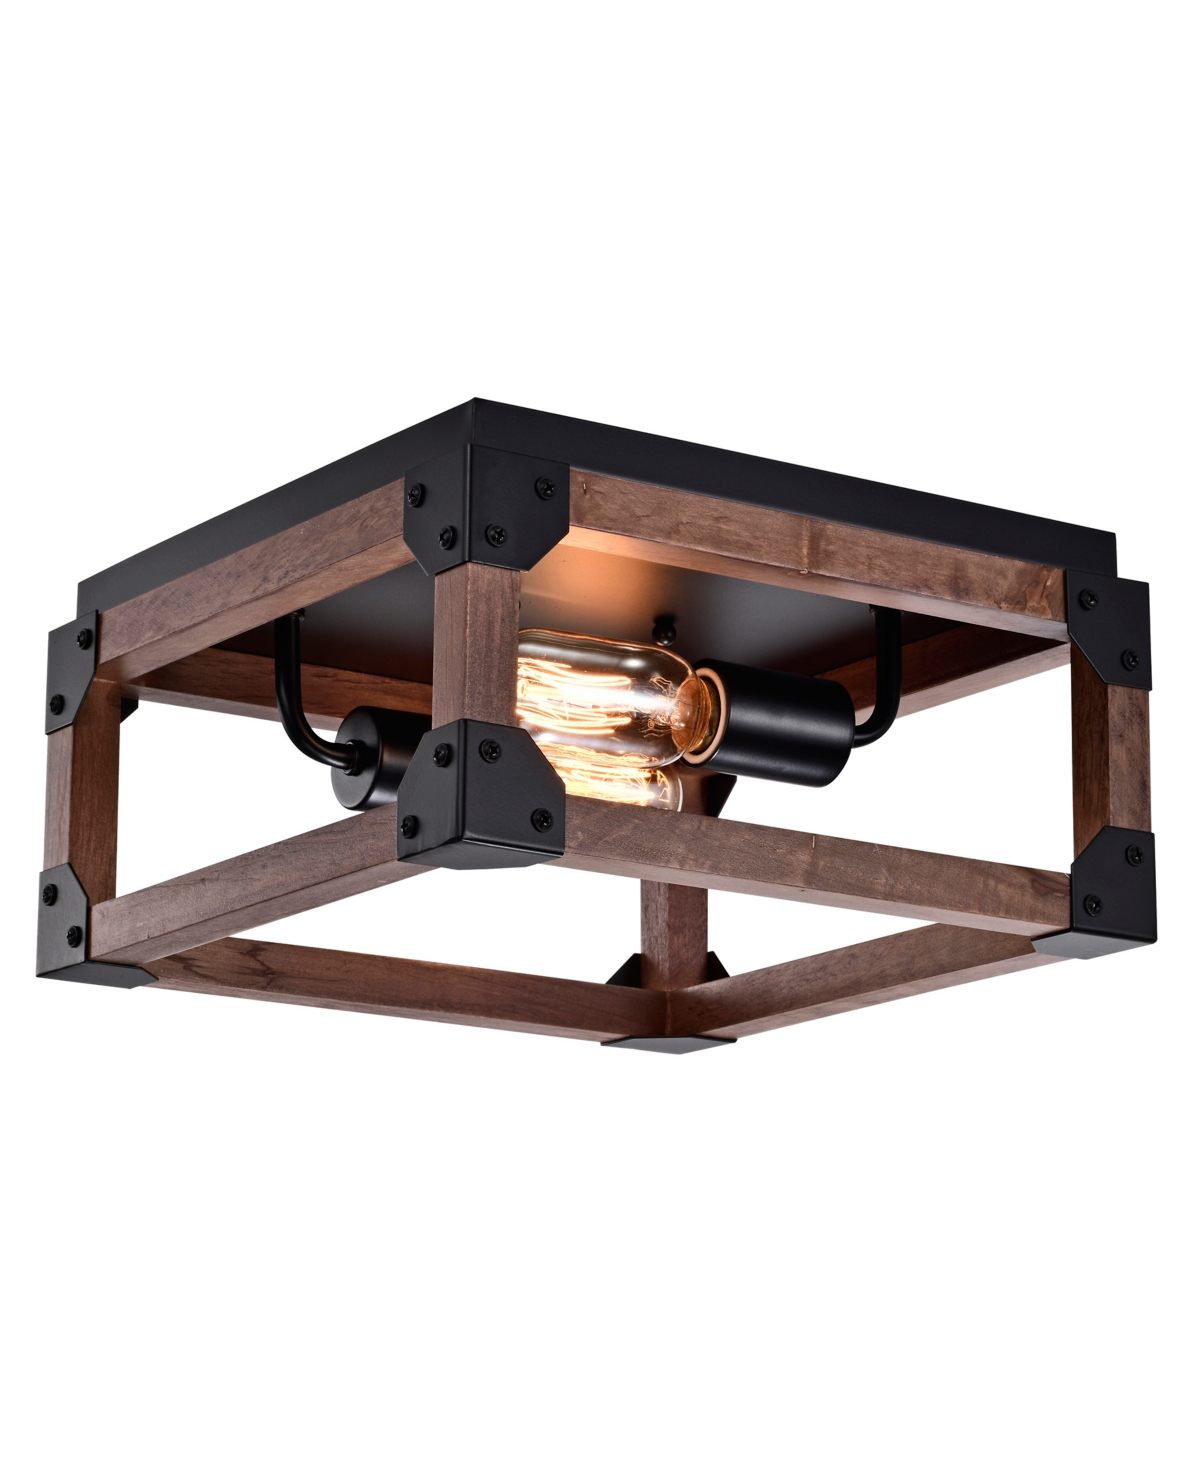 Home Accessories Irmana 12" 2-light Indoor Flush Mount With Light Kit In Brown And Matte Black